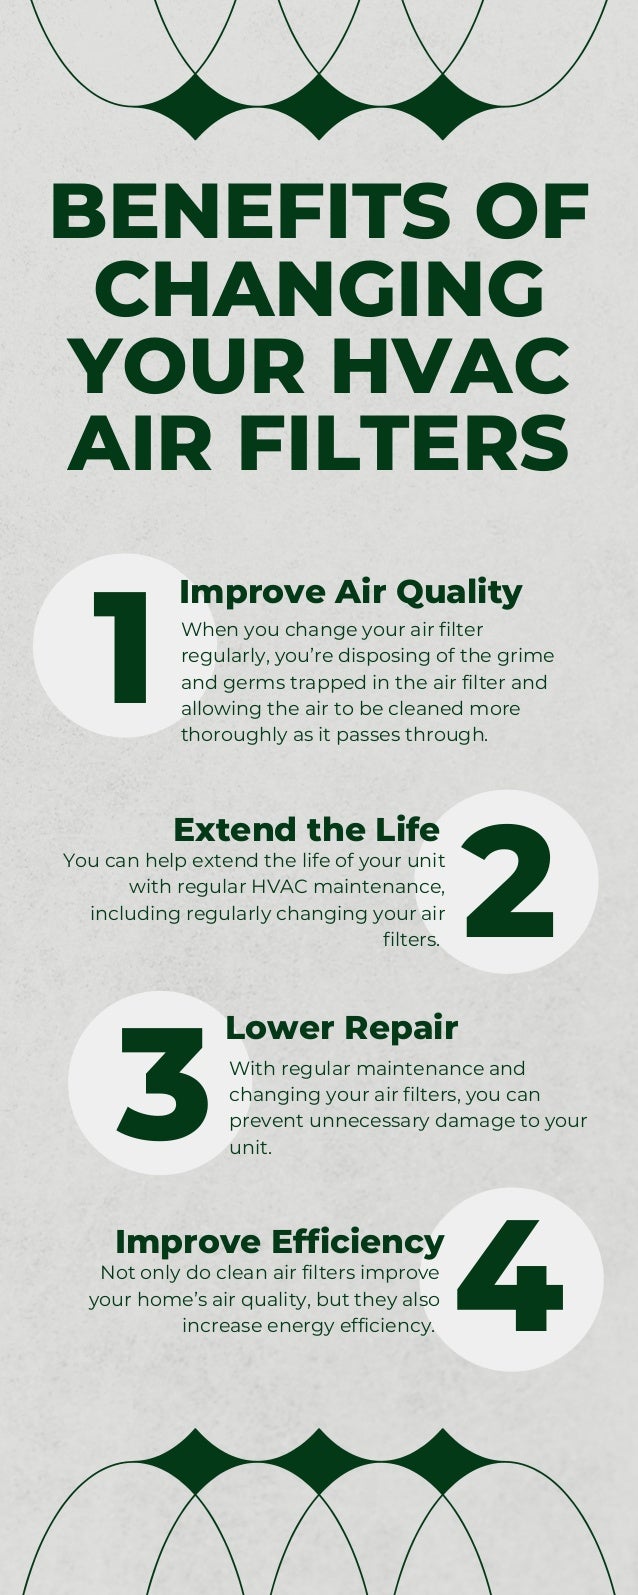 BENEFITS OF
CHANGING
YOUR HVAC
AIR FILTERS
When you change your air filter
regularly, you’re disposing of the grime
and germs trapped in the air filter and
allowing the air to be cleaned more
thoroughly as it passes through.
Improve Air Quality
Lower Repair
Extend the Life
Improve Efficiency
With regular maintenance and
changing your air filters, you can
prevent unnecessary damage to your
unit.
You can help extend the life of your unit
with regular HVAC maintenance,
including regularly changing your air
filters.
Not only do clean air filters improve
your home’s air quality, but they also
increase energy efficiency.
1
3
2
4
 